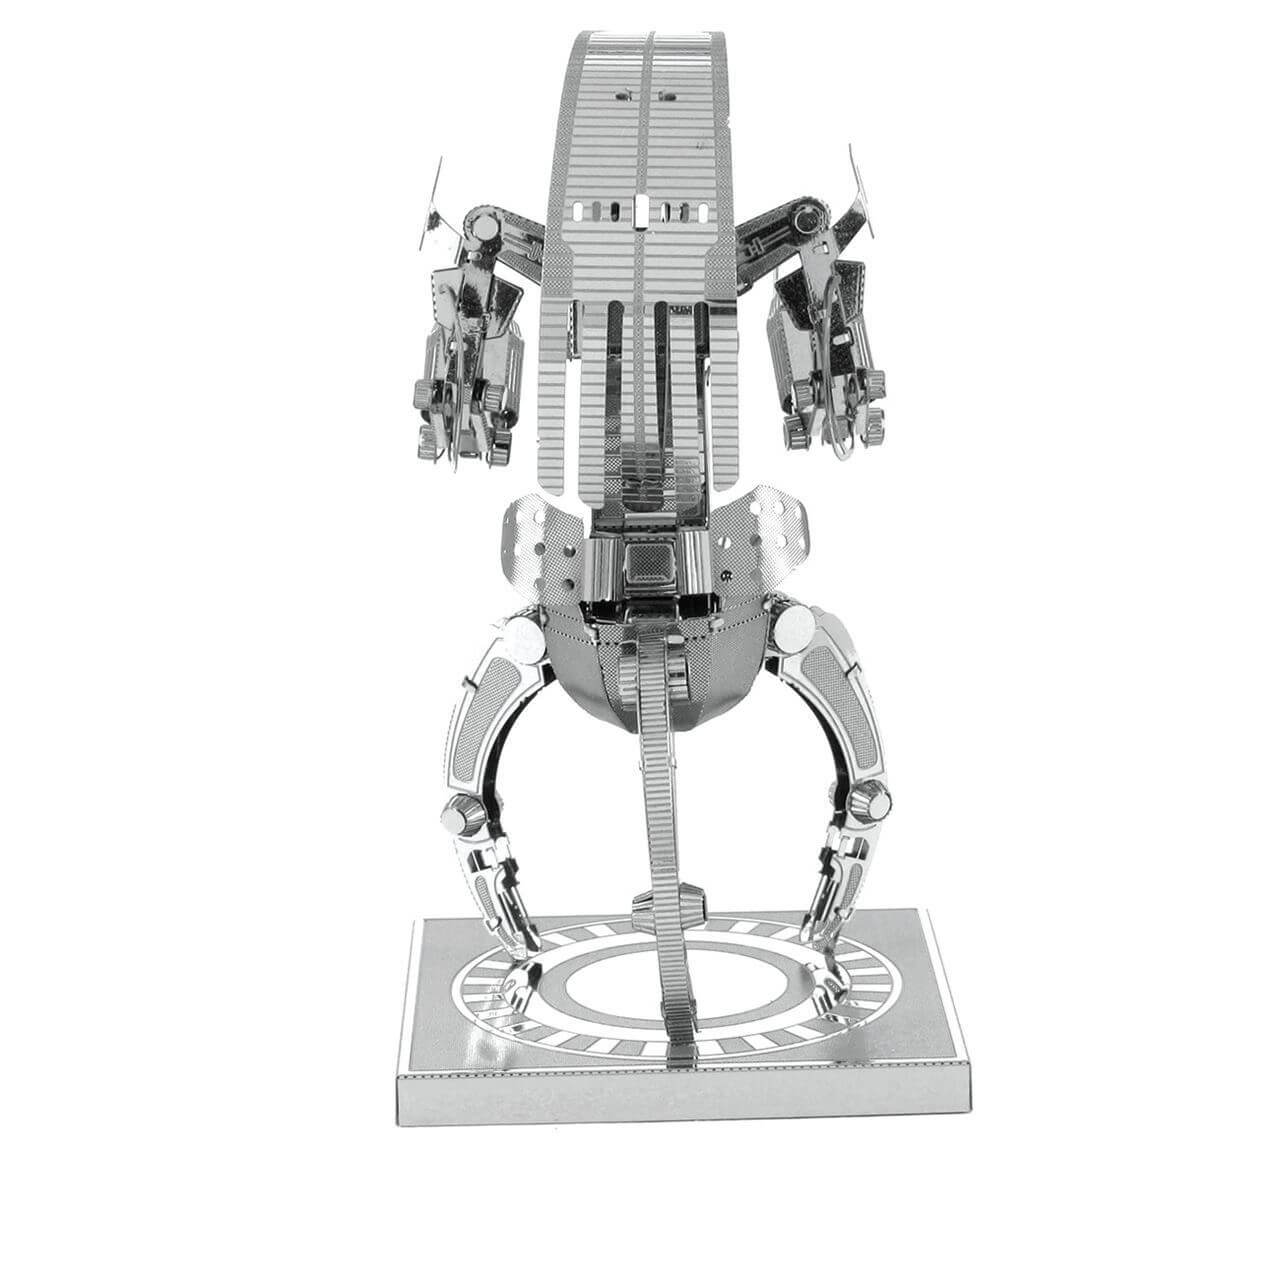 Back view of the metel droid.